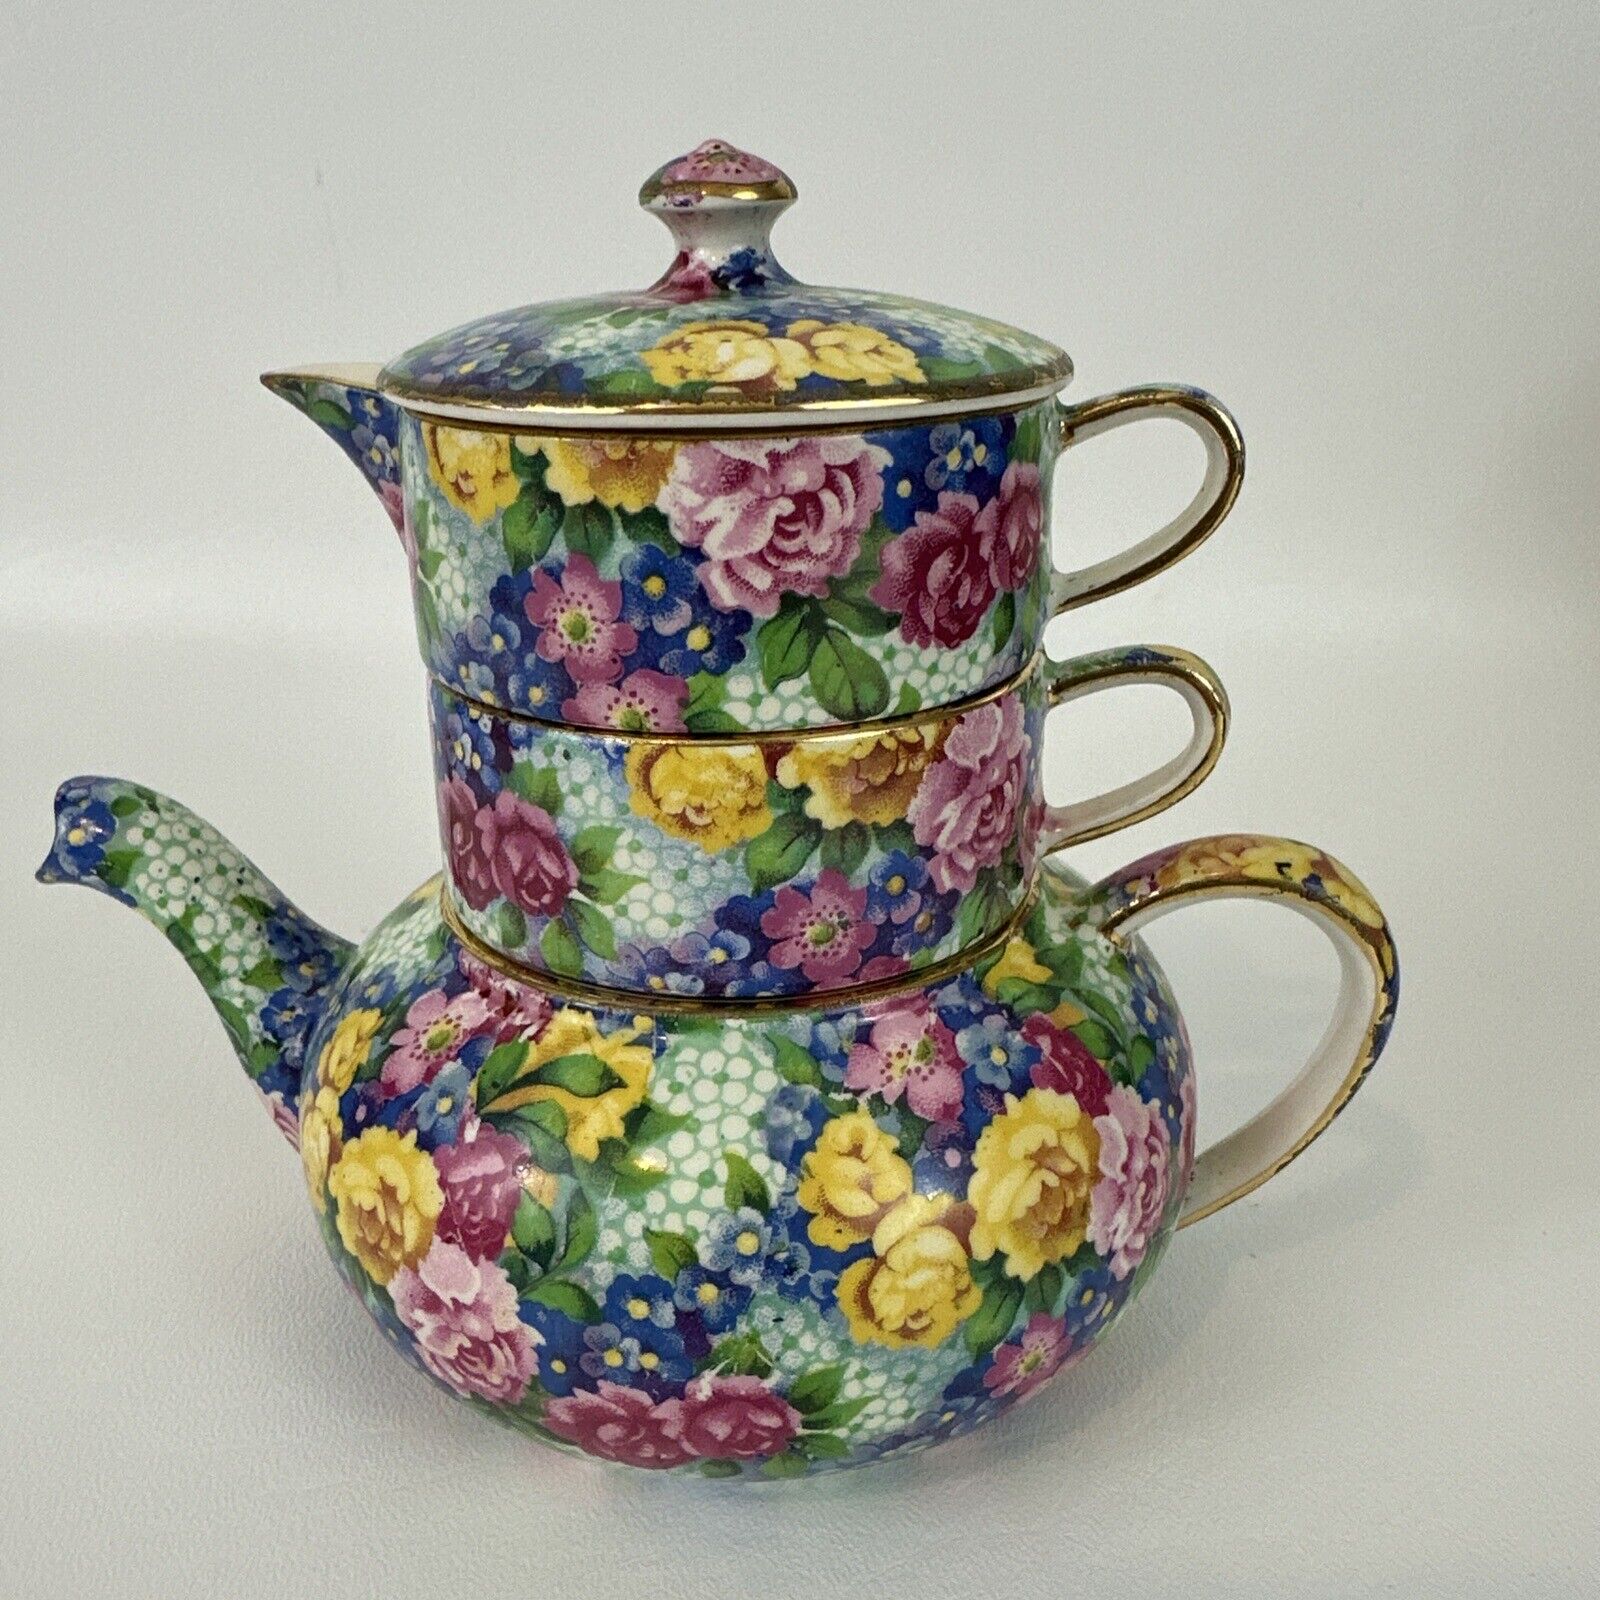 Royal Winton Julia Grimwades China Stacked Teapot For One Made in England